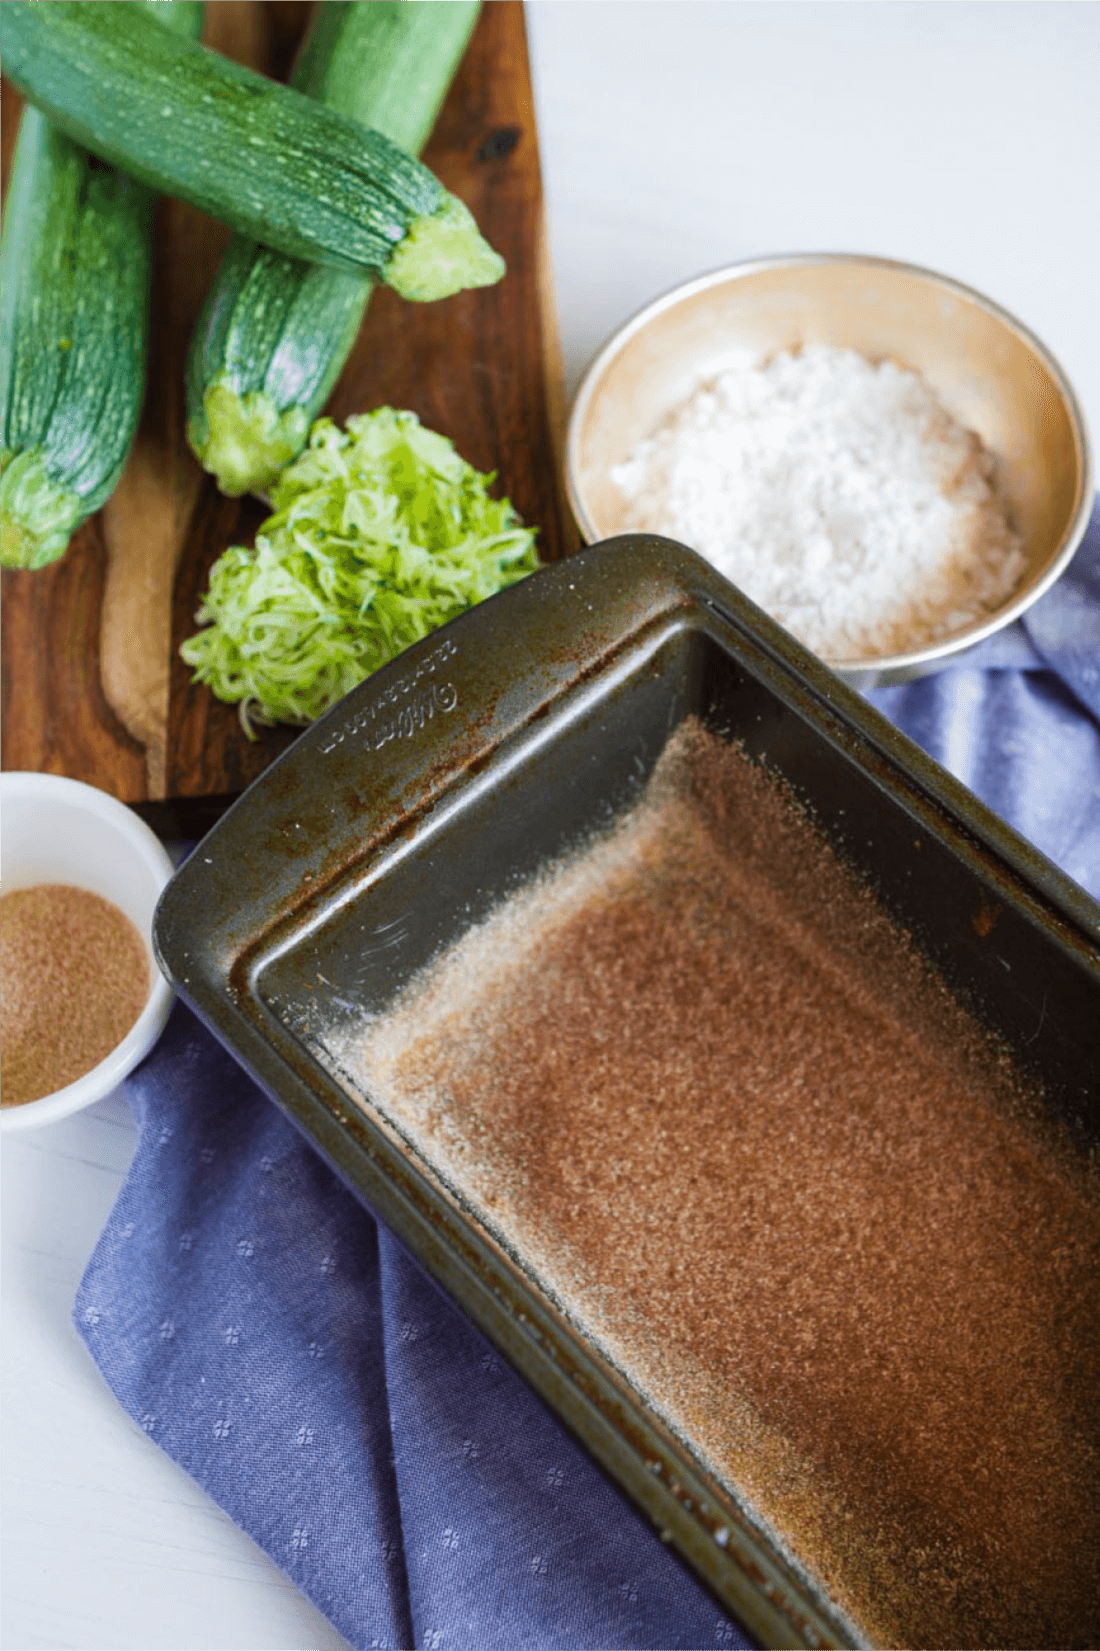 Zucchini Bread with Brown Sugar Topping - try this amazing quick bread. It's so easy to make and delicious! Add some cinnamon sugar to the loaf pan.